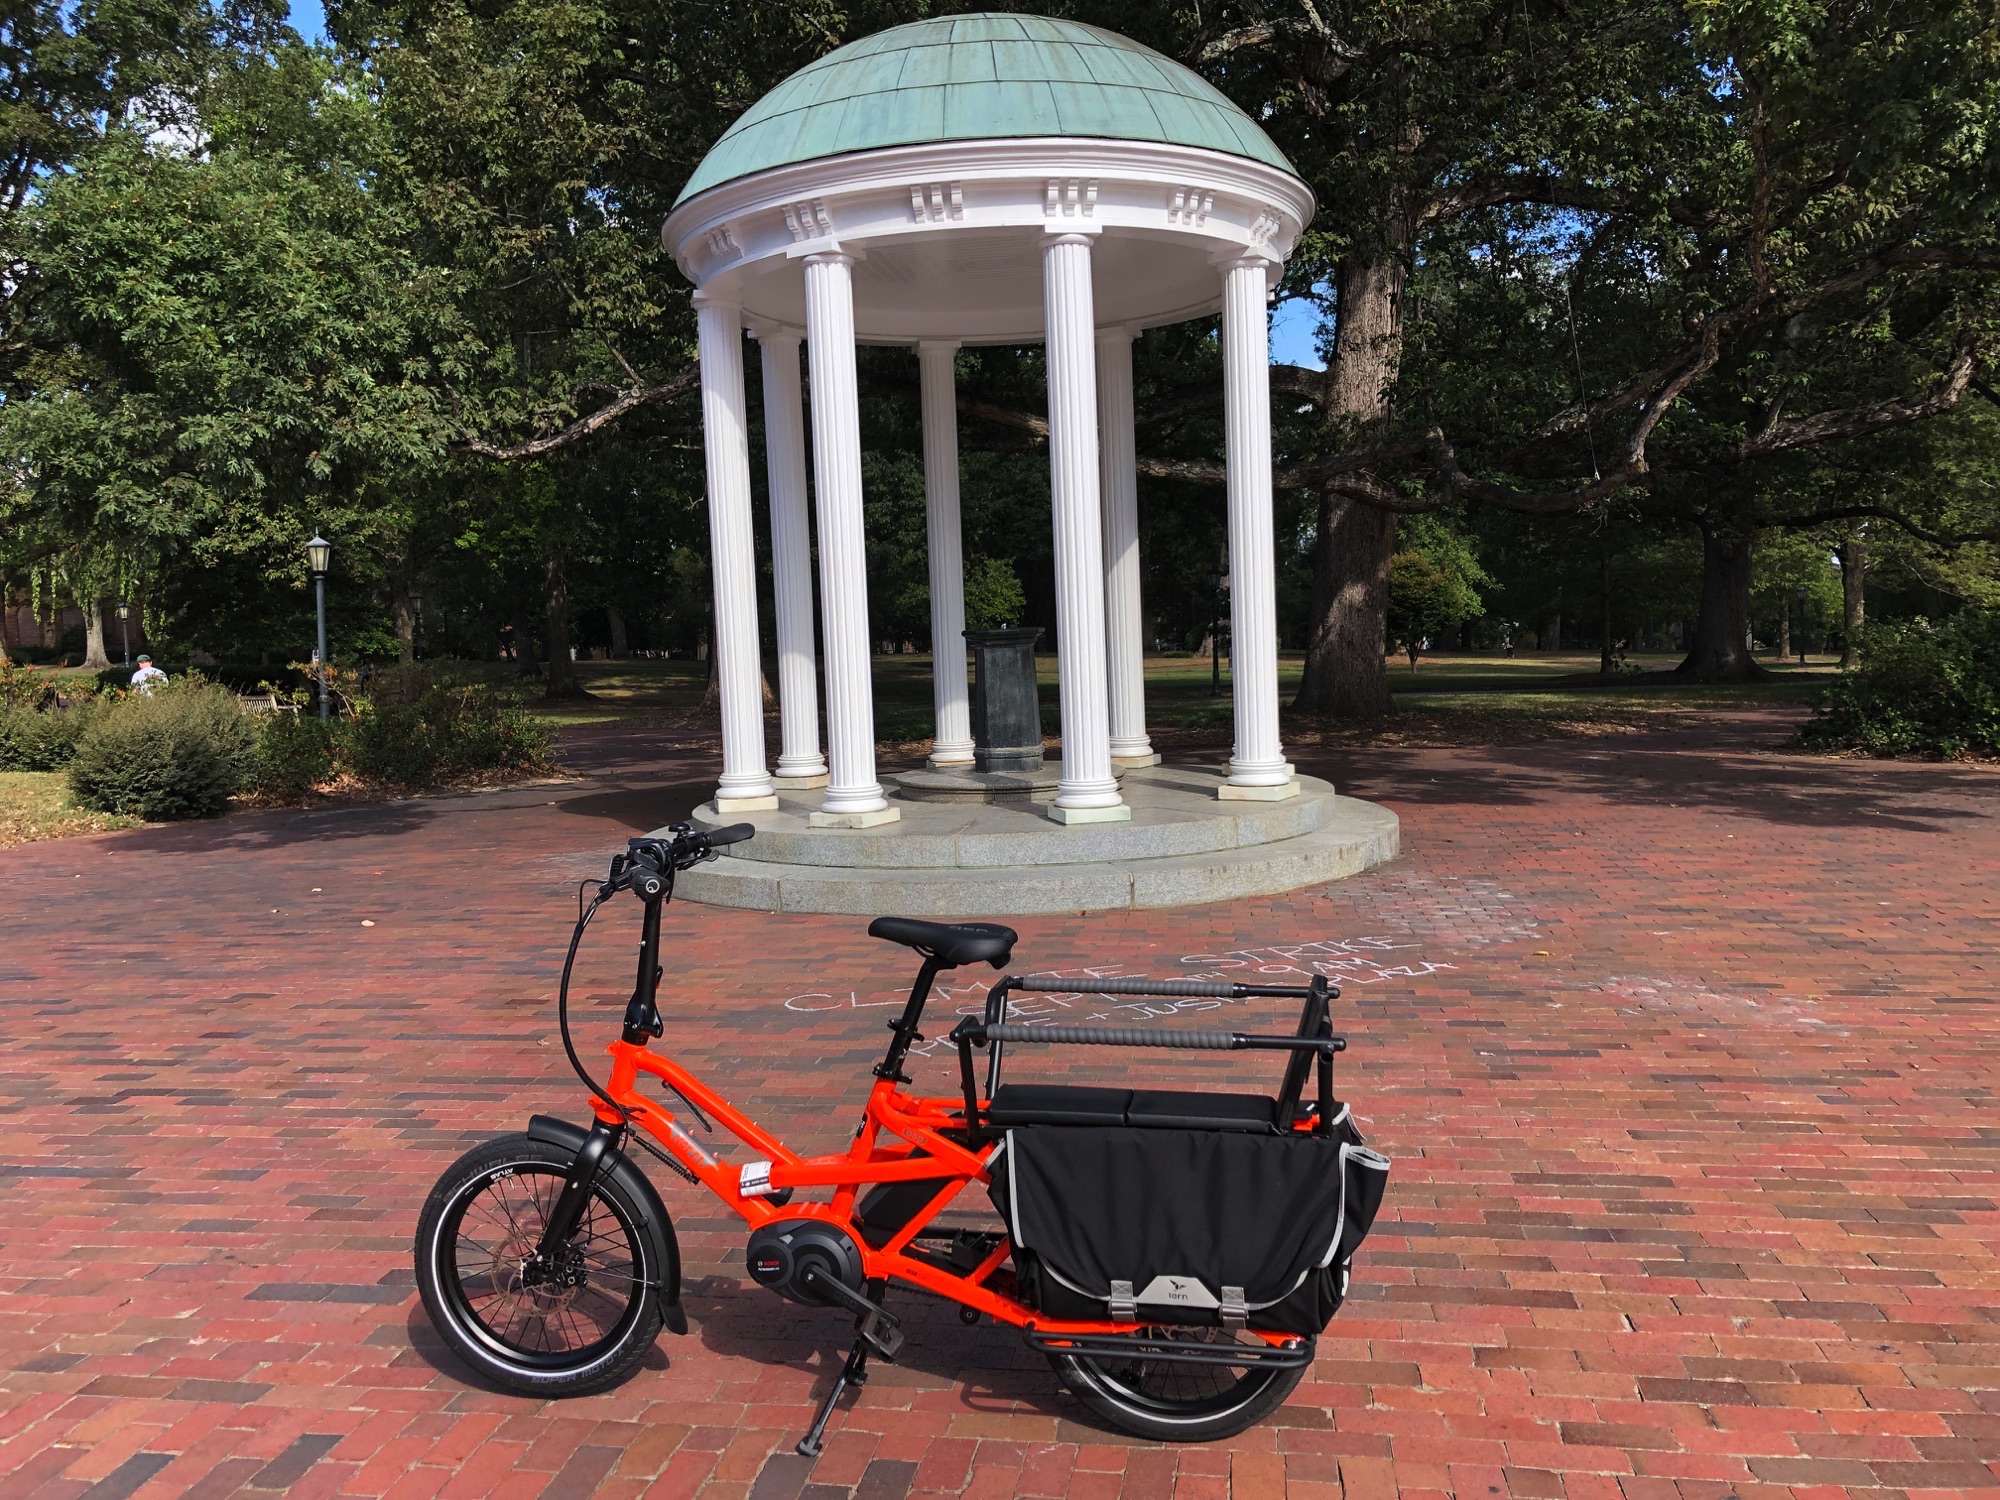 eBike Central at UNC in Chapel Hill NC